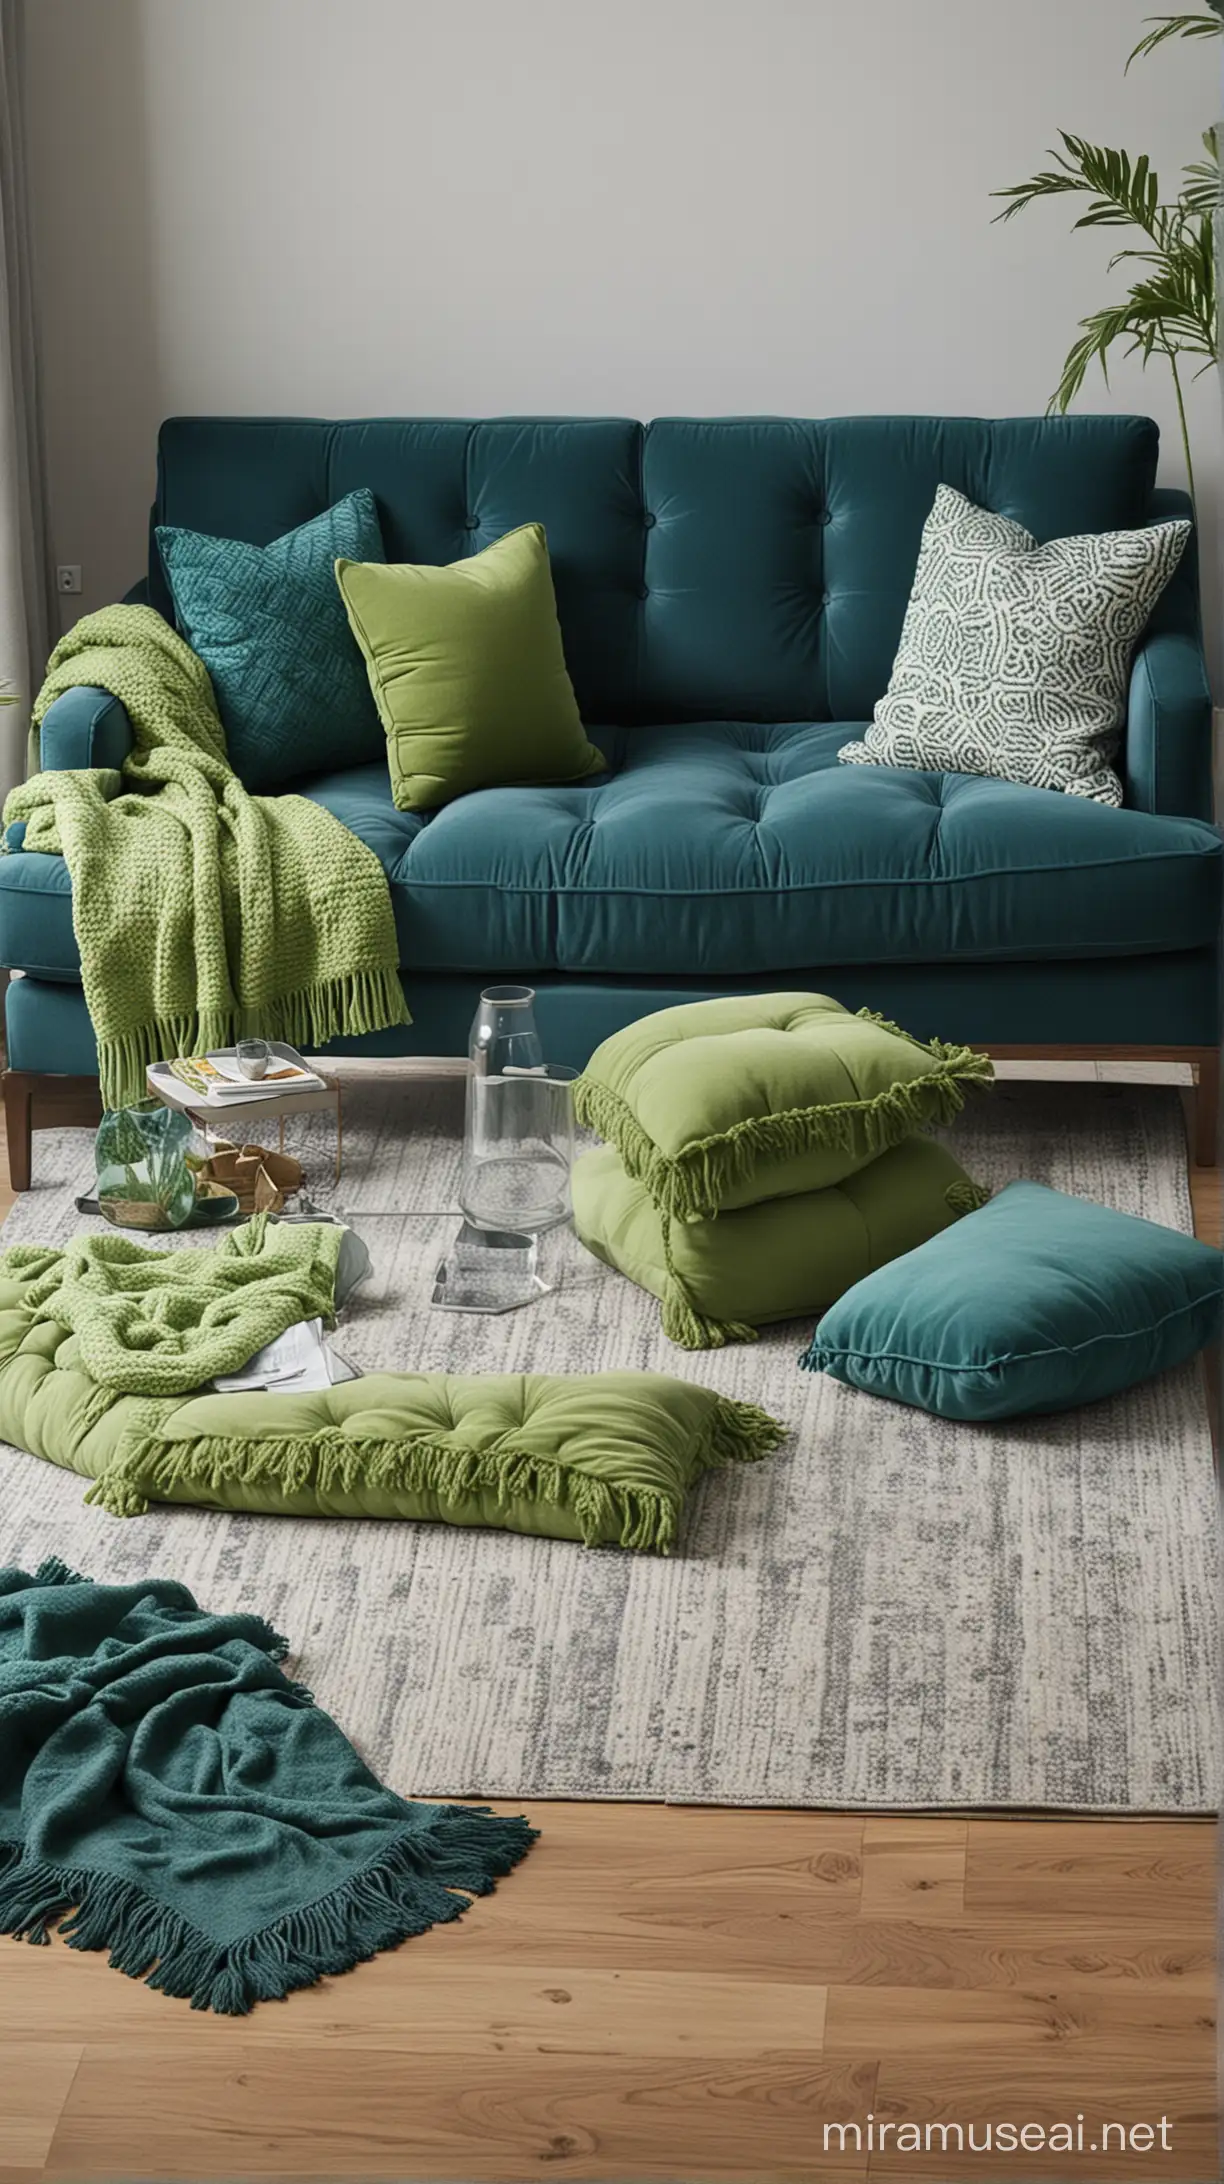 create a blue and green living room idea image [Blue Sofas with Green Throws  If you’re looking to add a dynamic yet harmonious look to your living room, consider placing a navy or sky blue sofa as your centerpiece and accentuating it with emerald green throw pillows or blankets. This contrast not only brings vibrancy to the space but also maintains a soothing ambiance.]